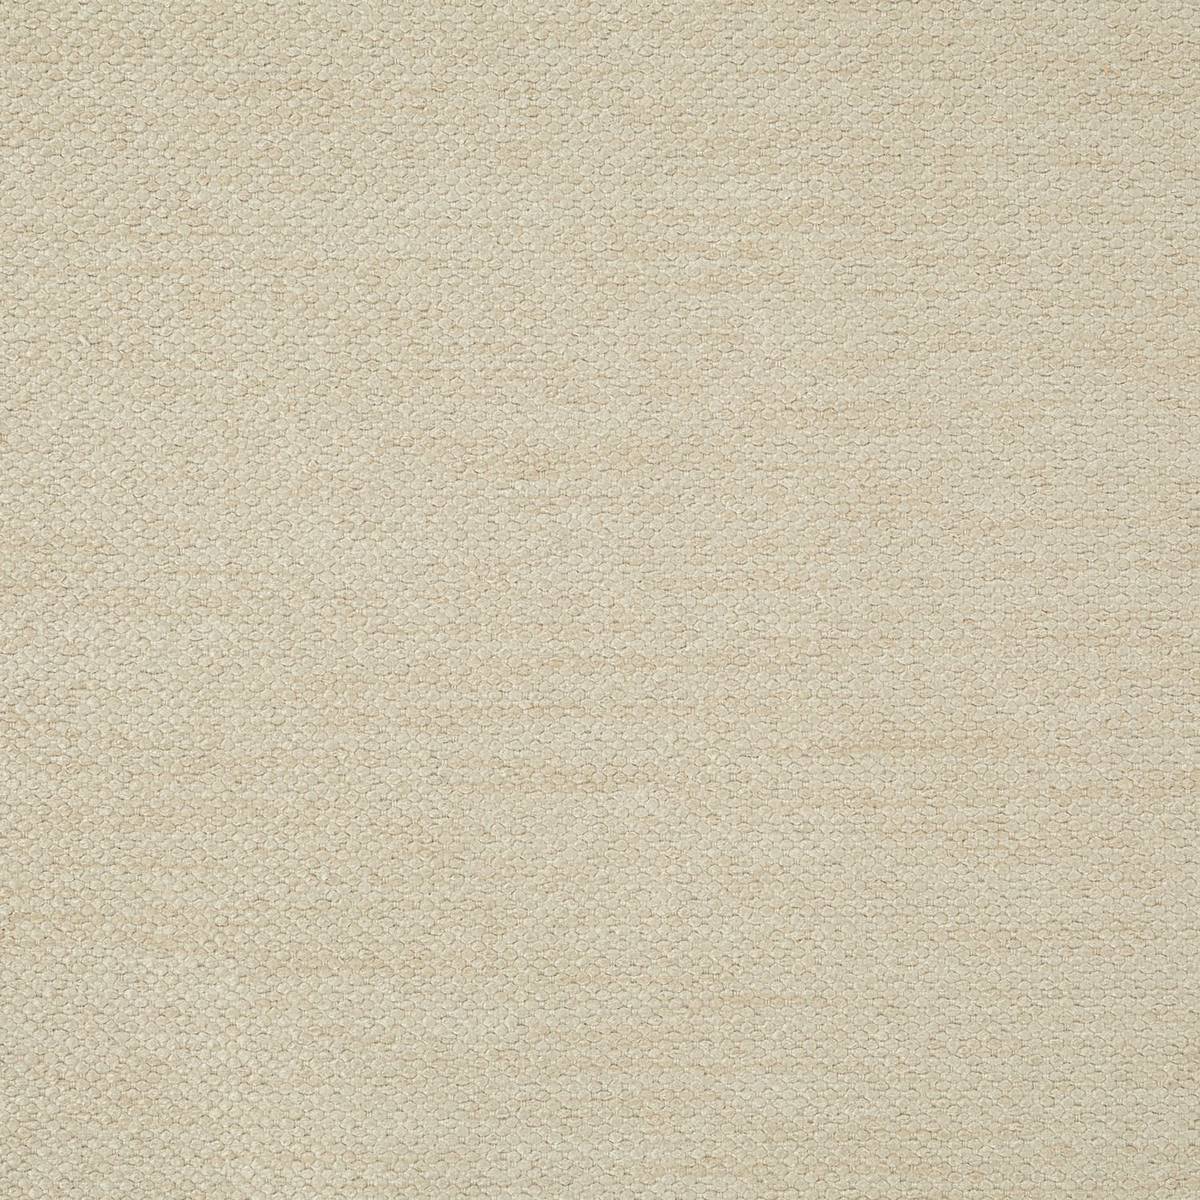 Factor Sandstone Fabric by Harlequin